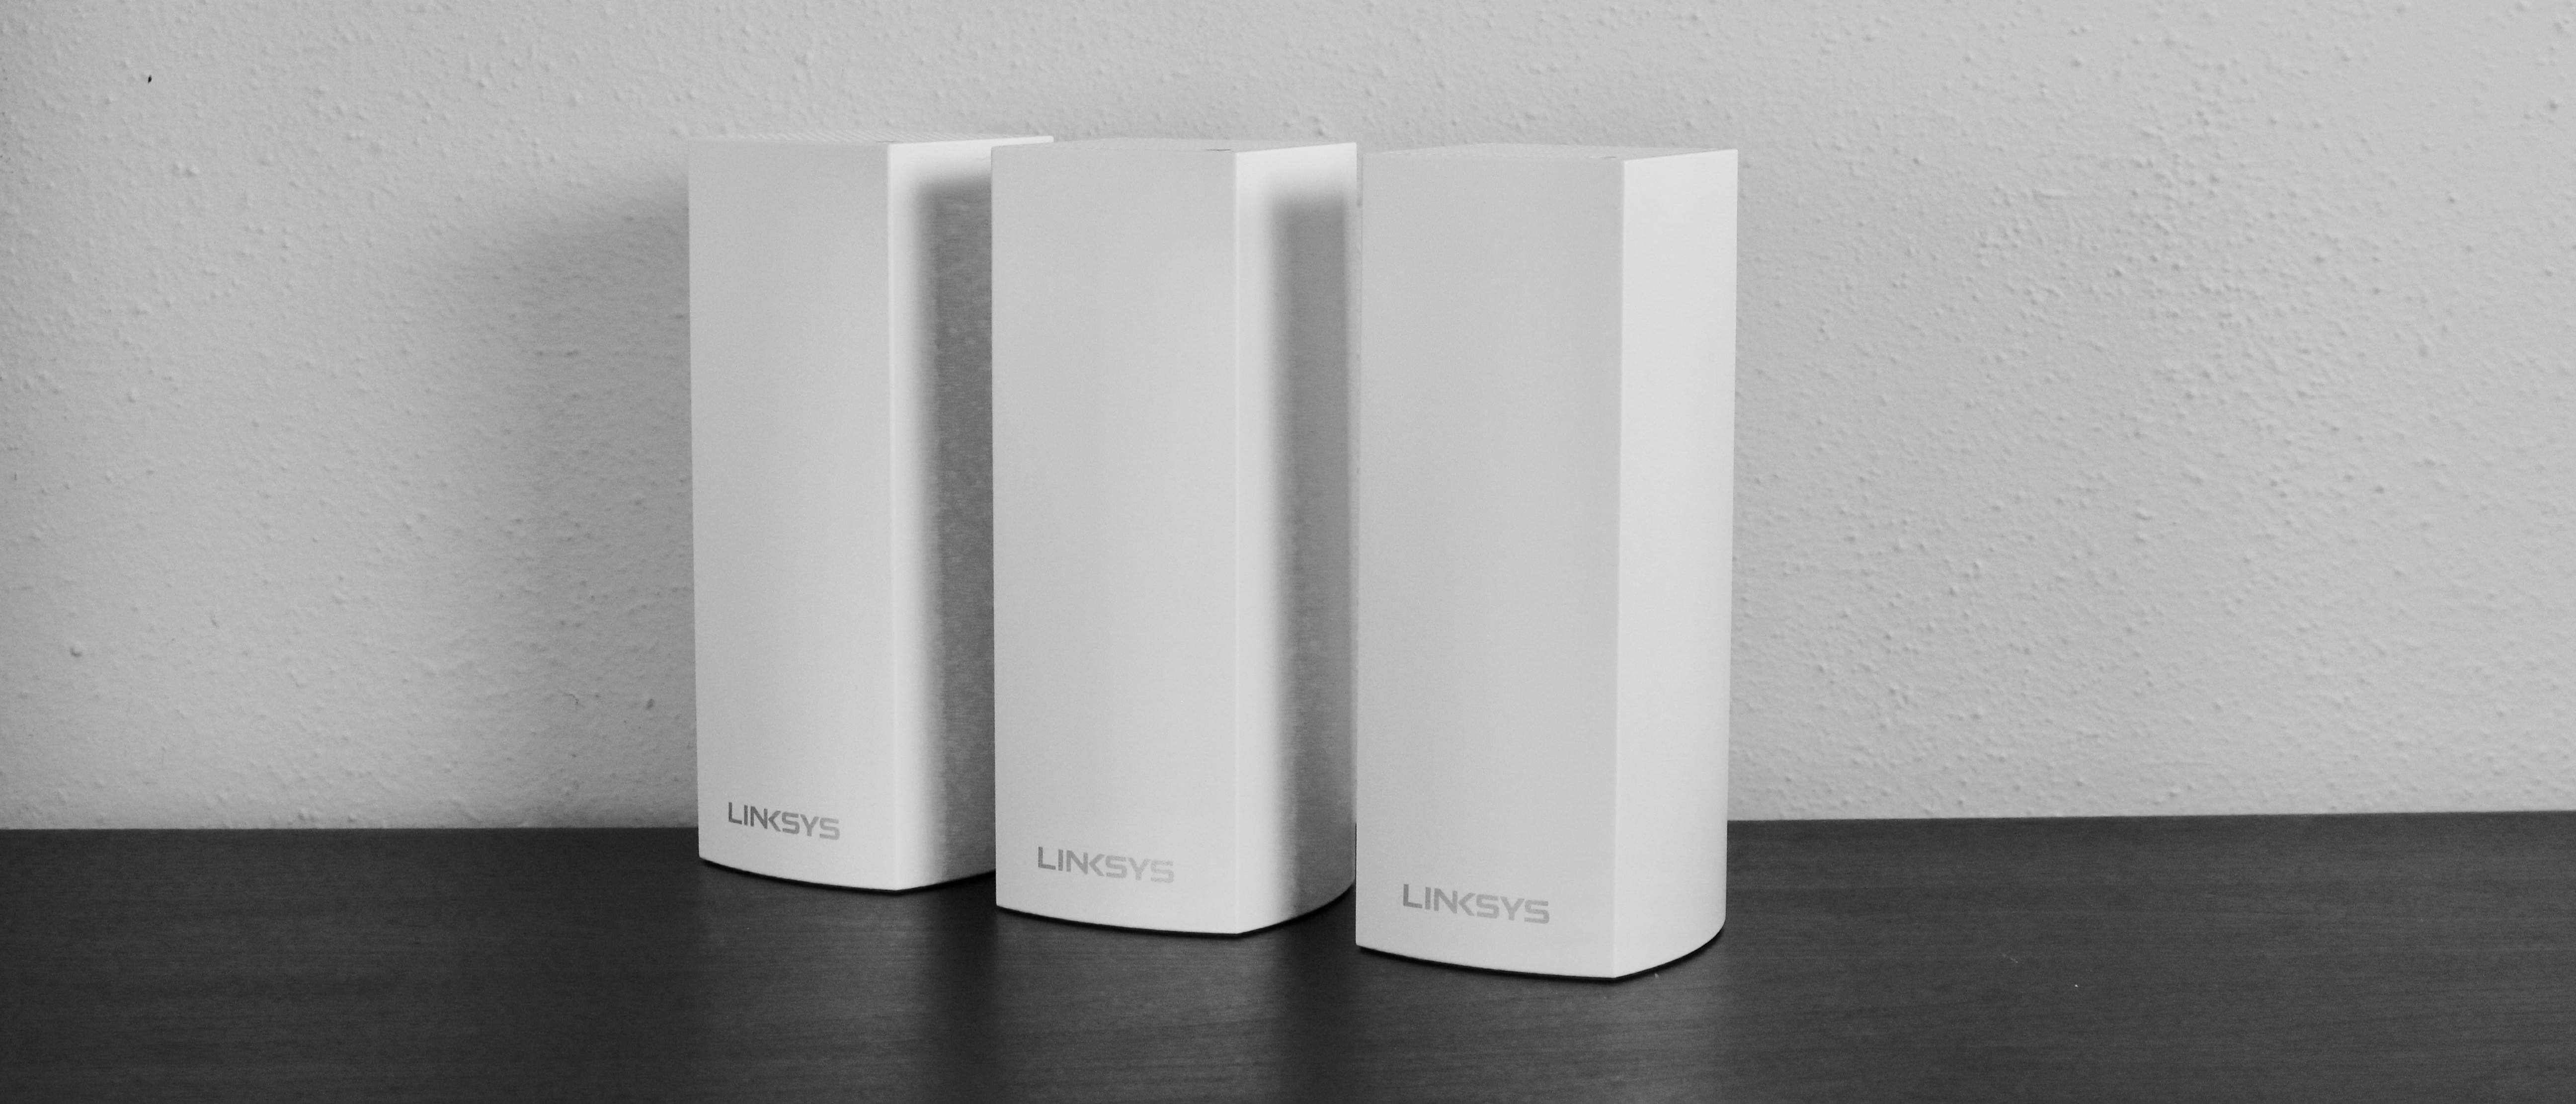 The Linksys Velop system on a dark surface against a gray background